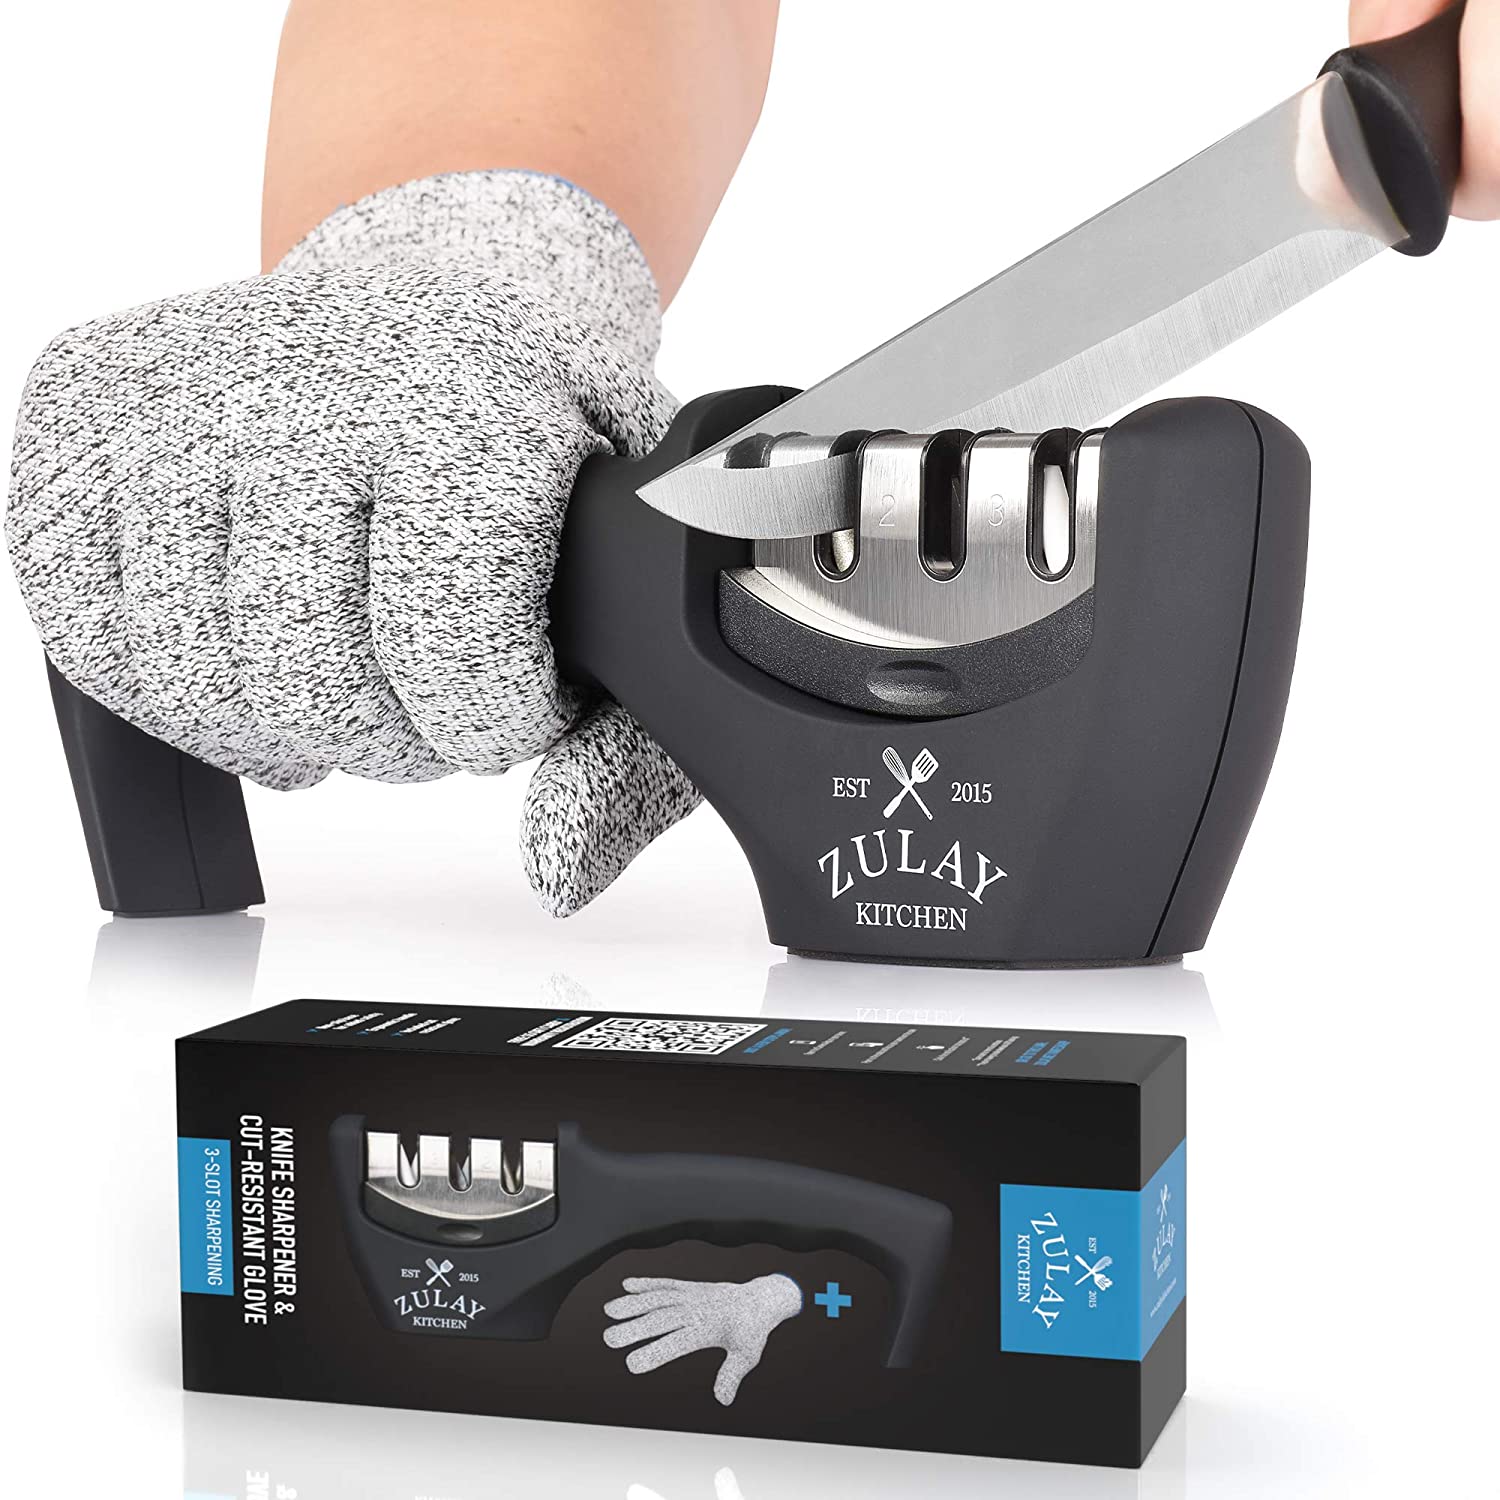 Zulay Kitchen Smooth Edge Can Opener - No Sharp Edges or Cuts